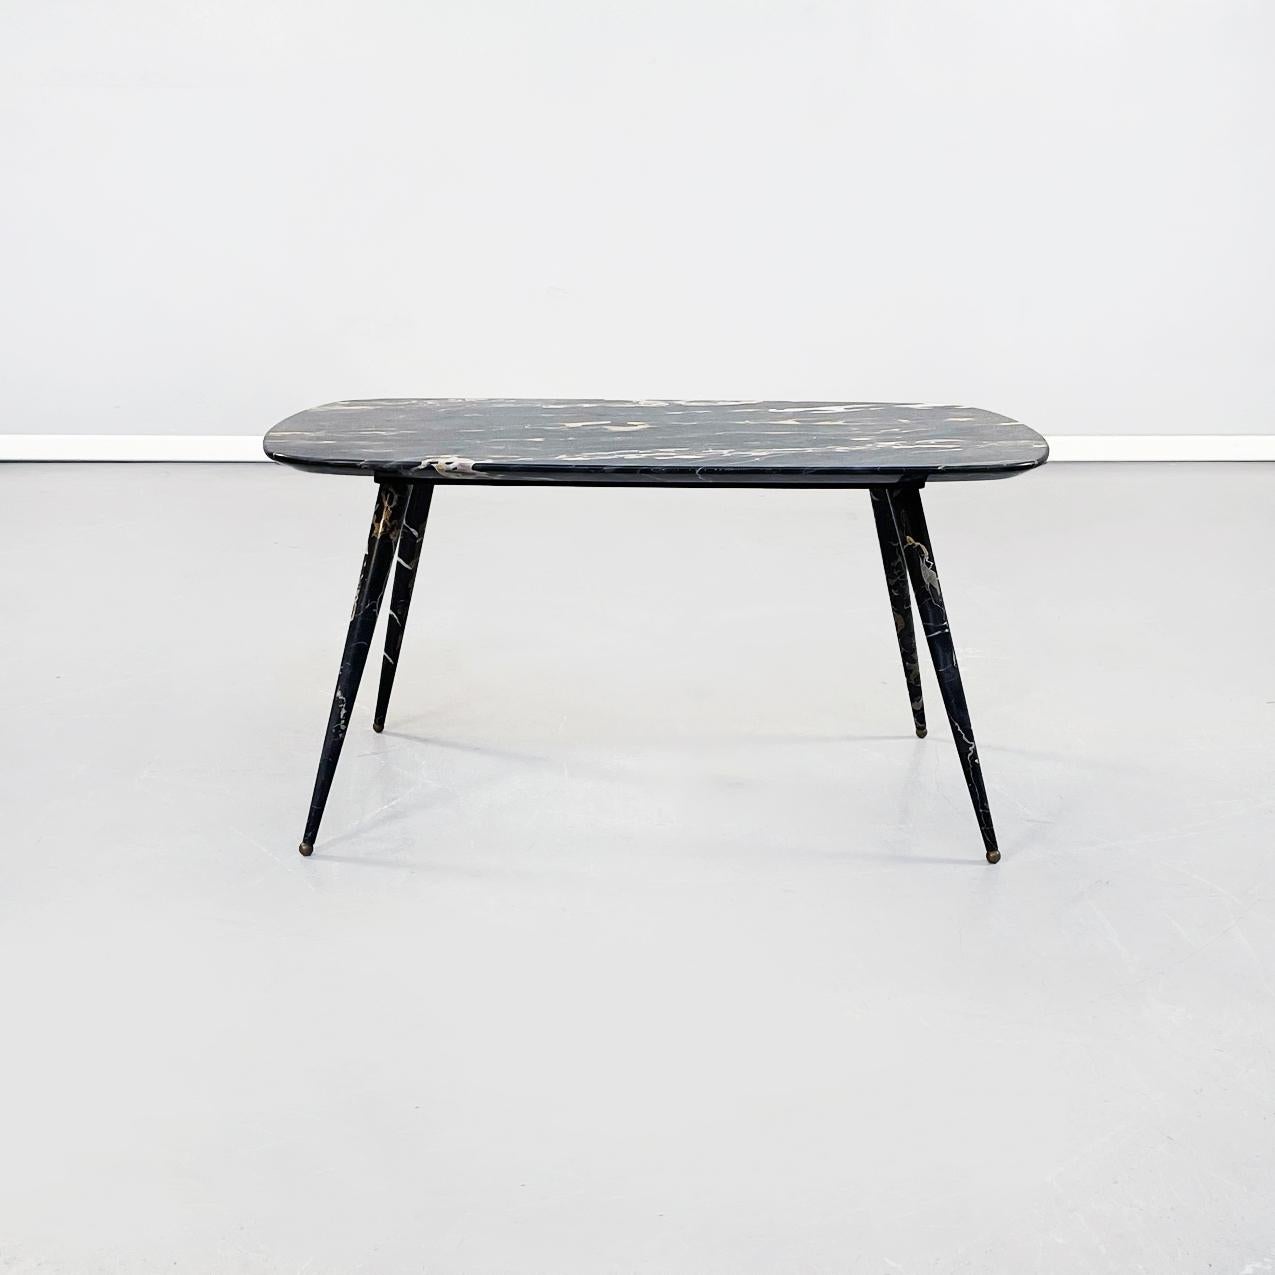 Italian mid-century coffee table in black Portoro marble, 1960s
Coffee table with rectangular top with rounded corners in Portoro marble. The top is supported by a metal structure that joins the 4 round legs in Portoro marble. The feet are round